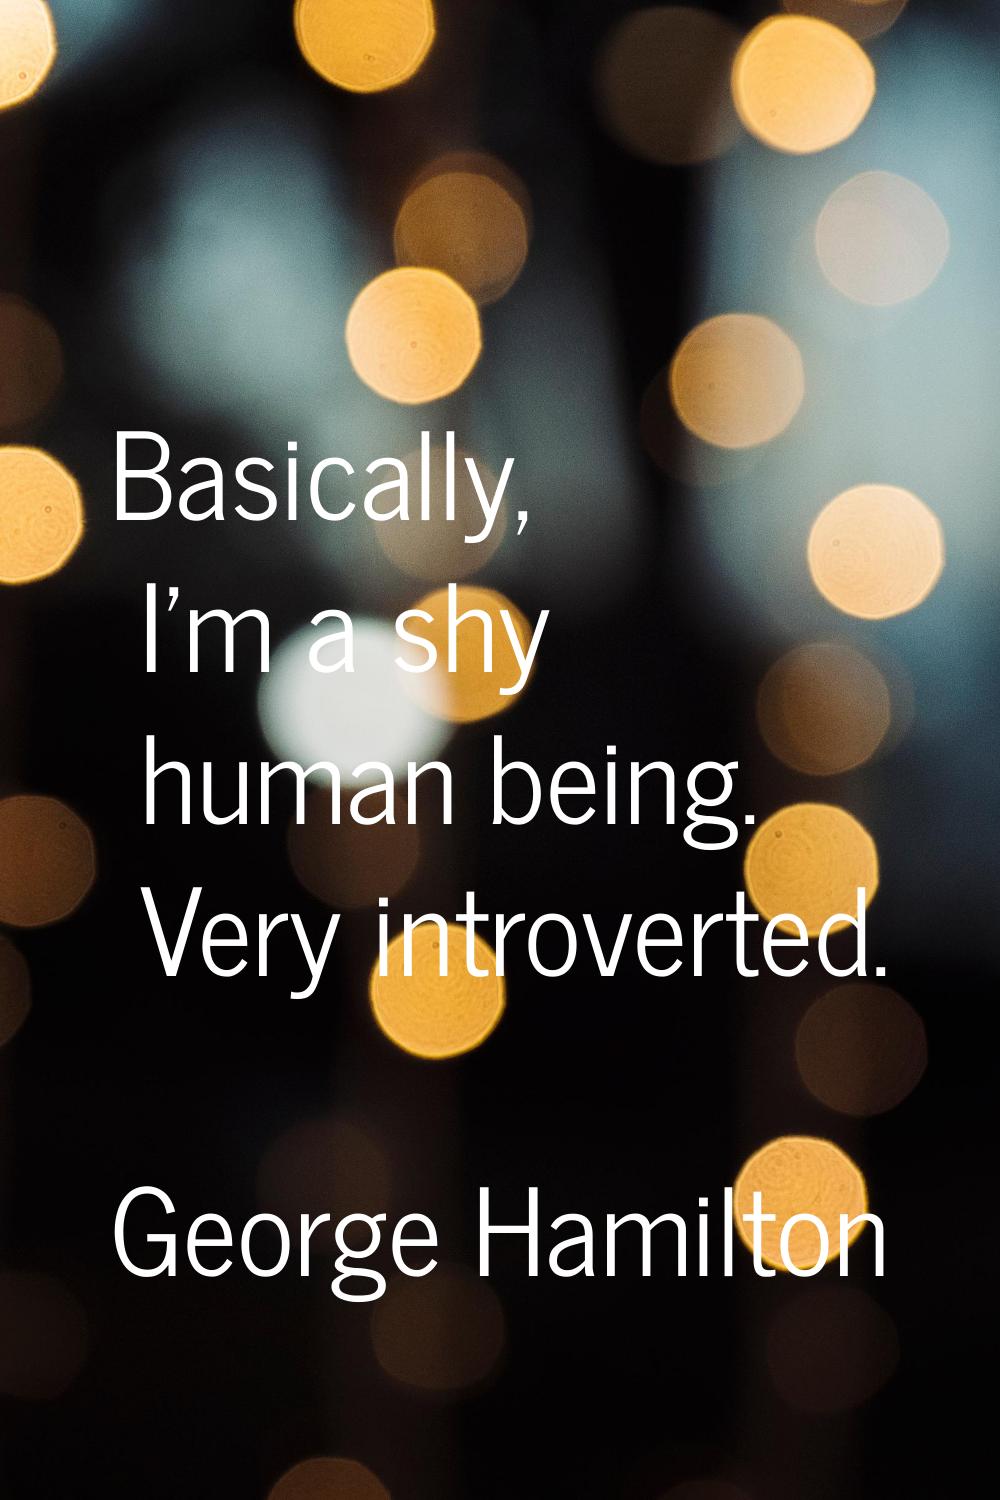 Basically, I'm a shy human being. Very introverted.